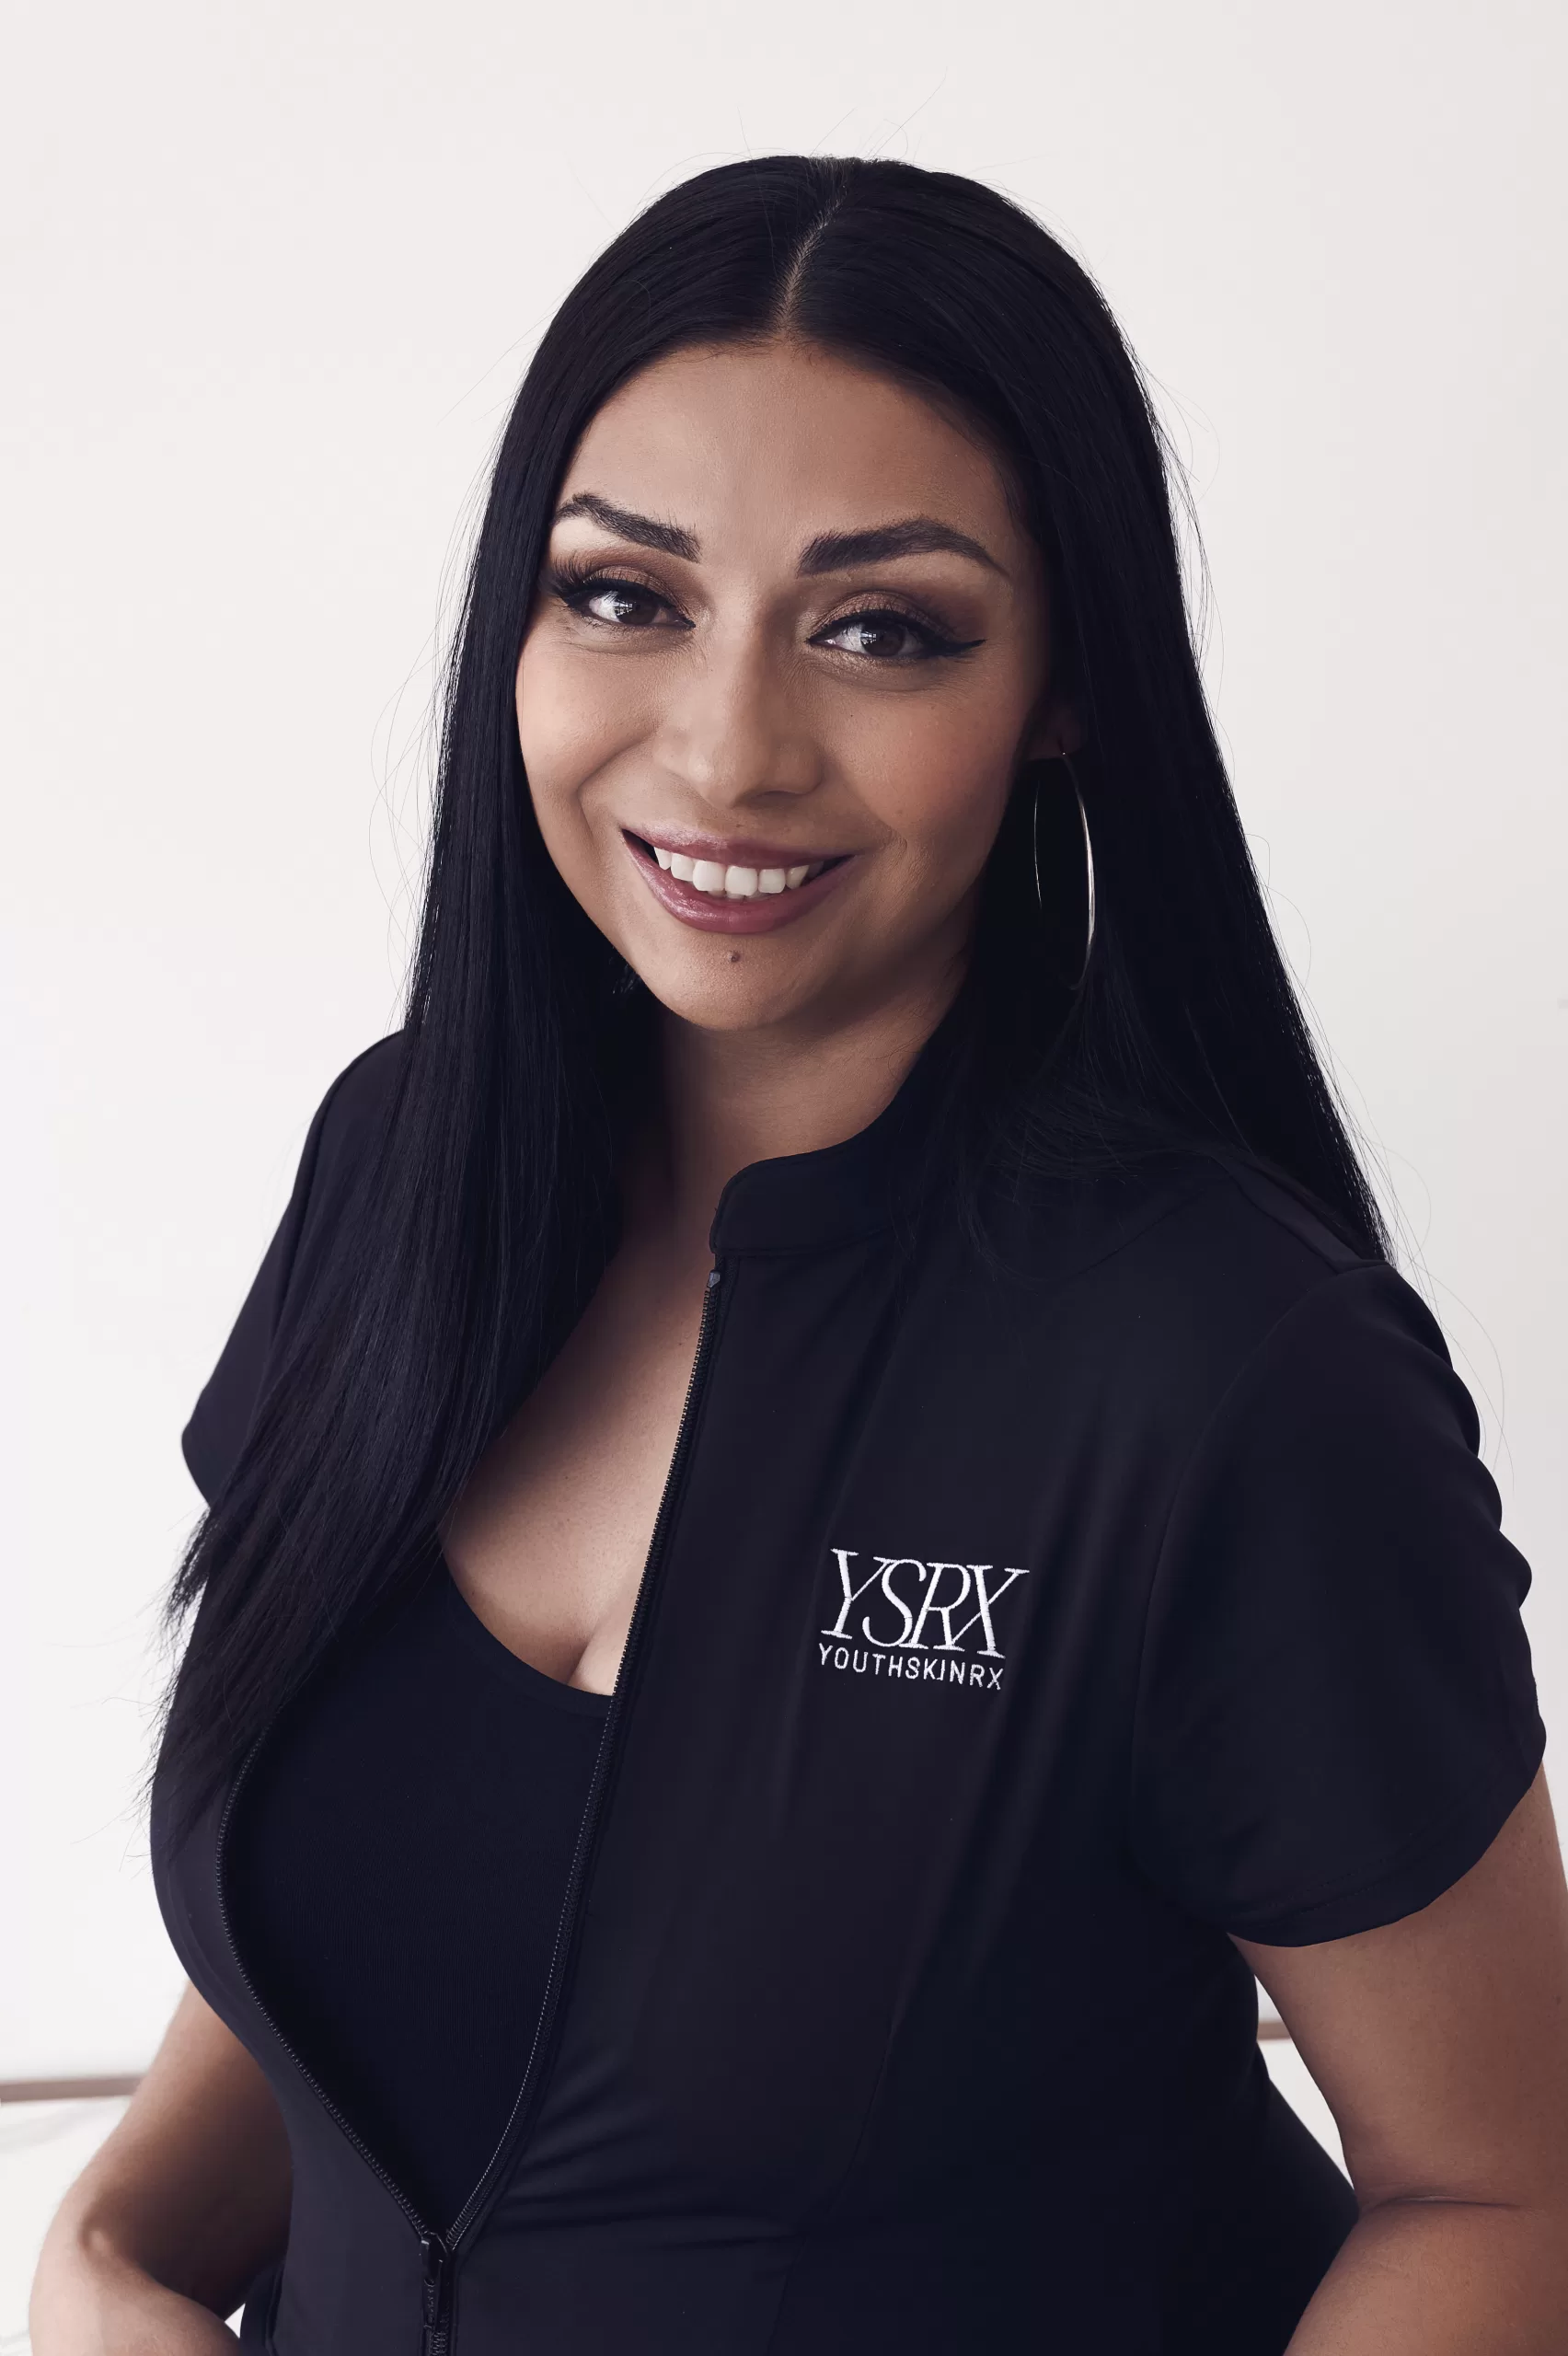 Woman wearing a black dress, representing the staff of Youth Skin Rx.